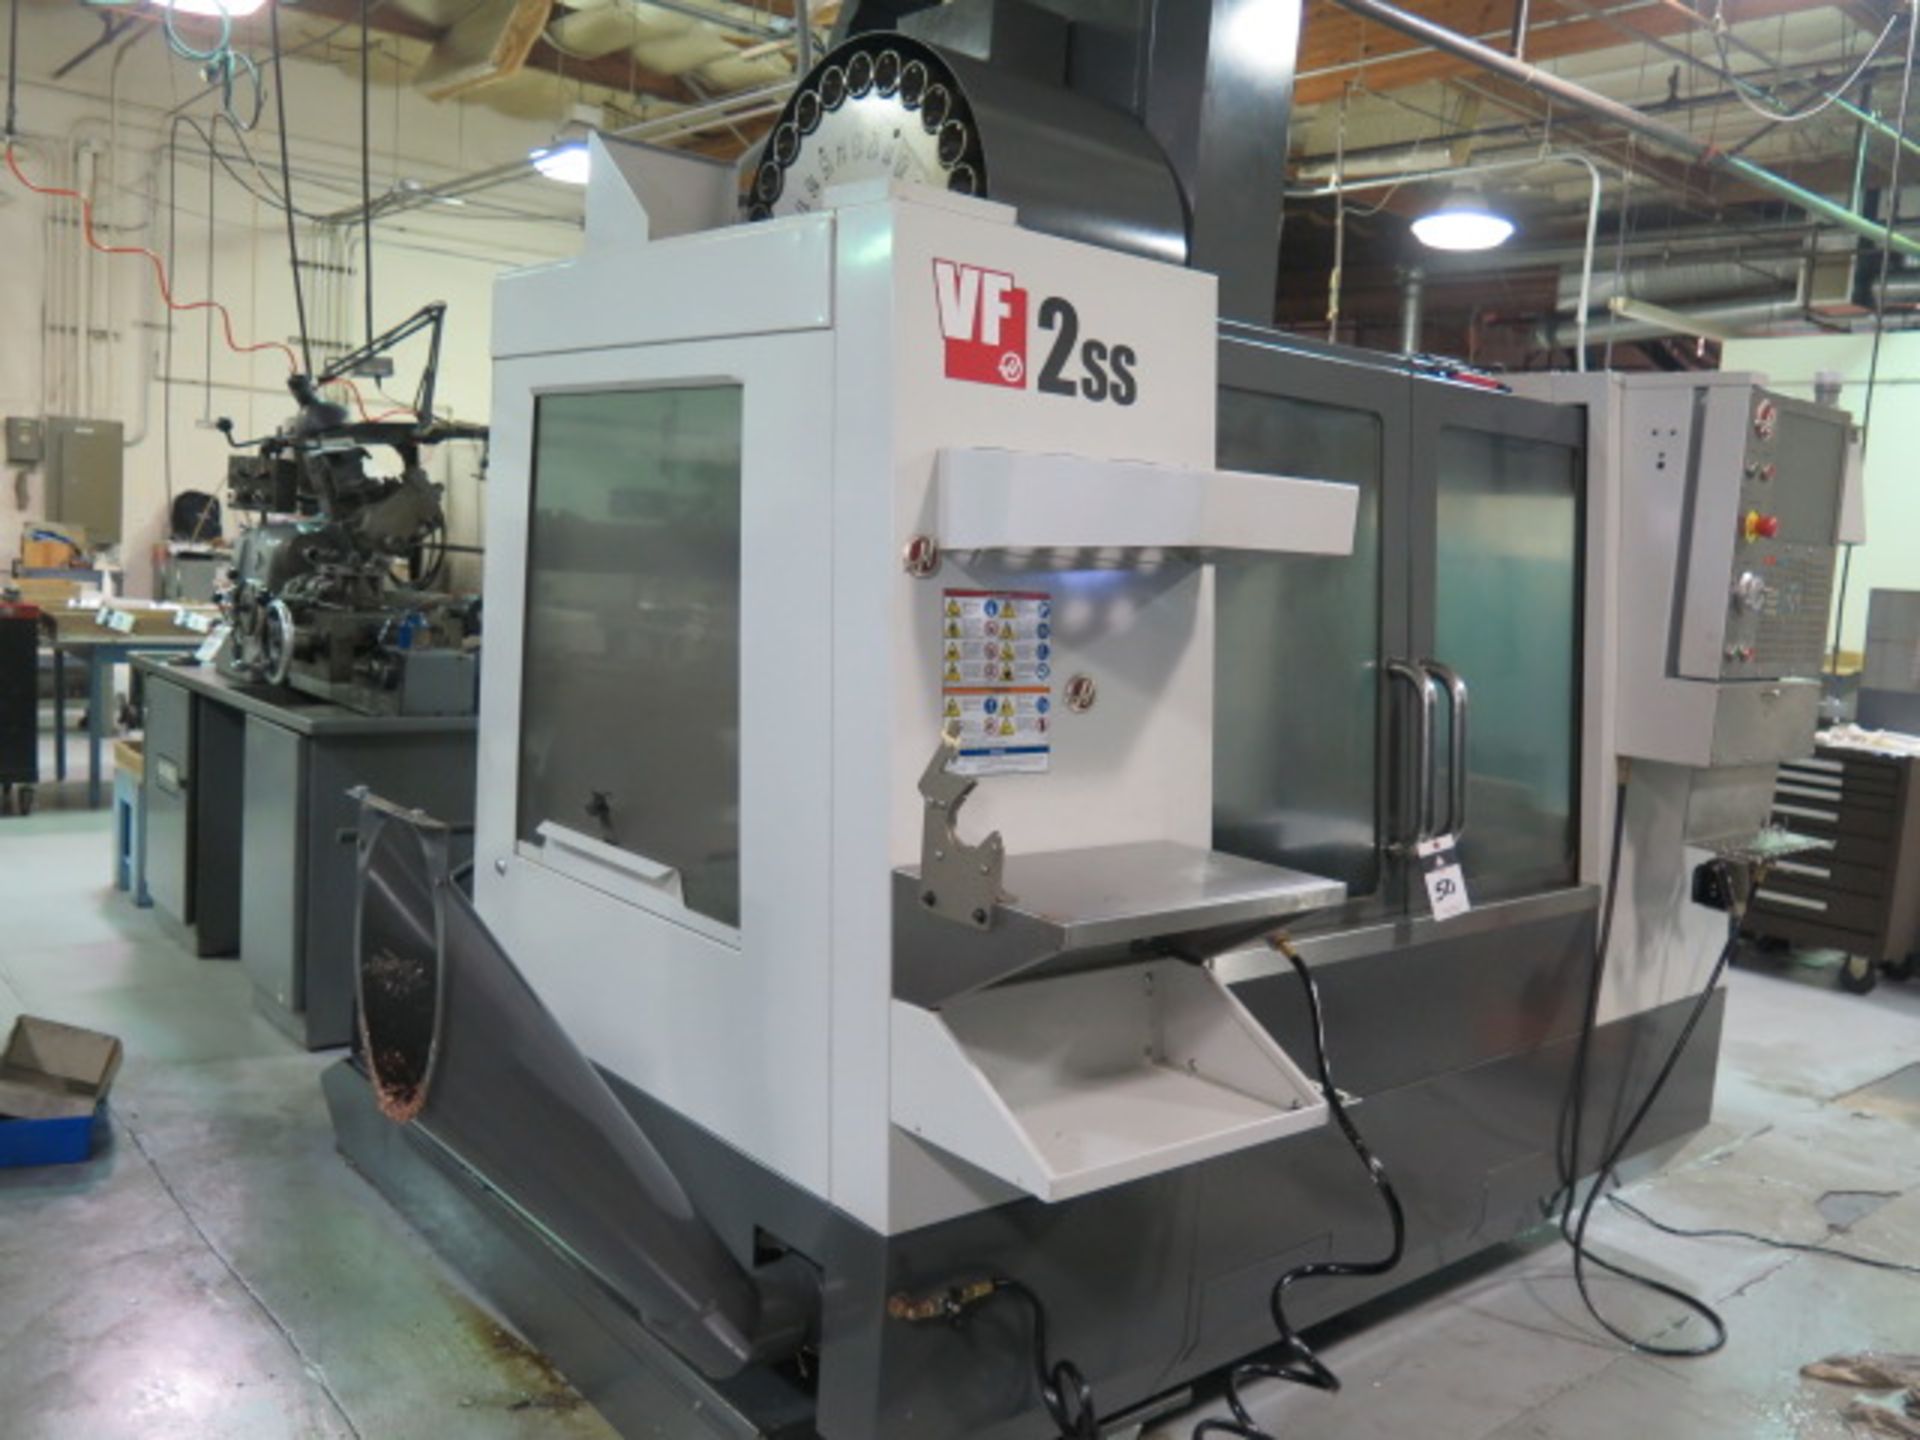 DEC 2014 Haas VF-2SS 4-Axis CNC Vertical Machining Center s/n 1118738 w/ Haas Controls, 24-Station - Image 4 of 13